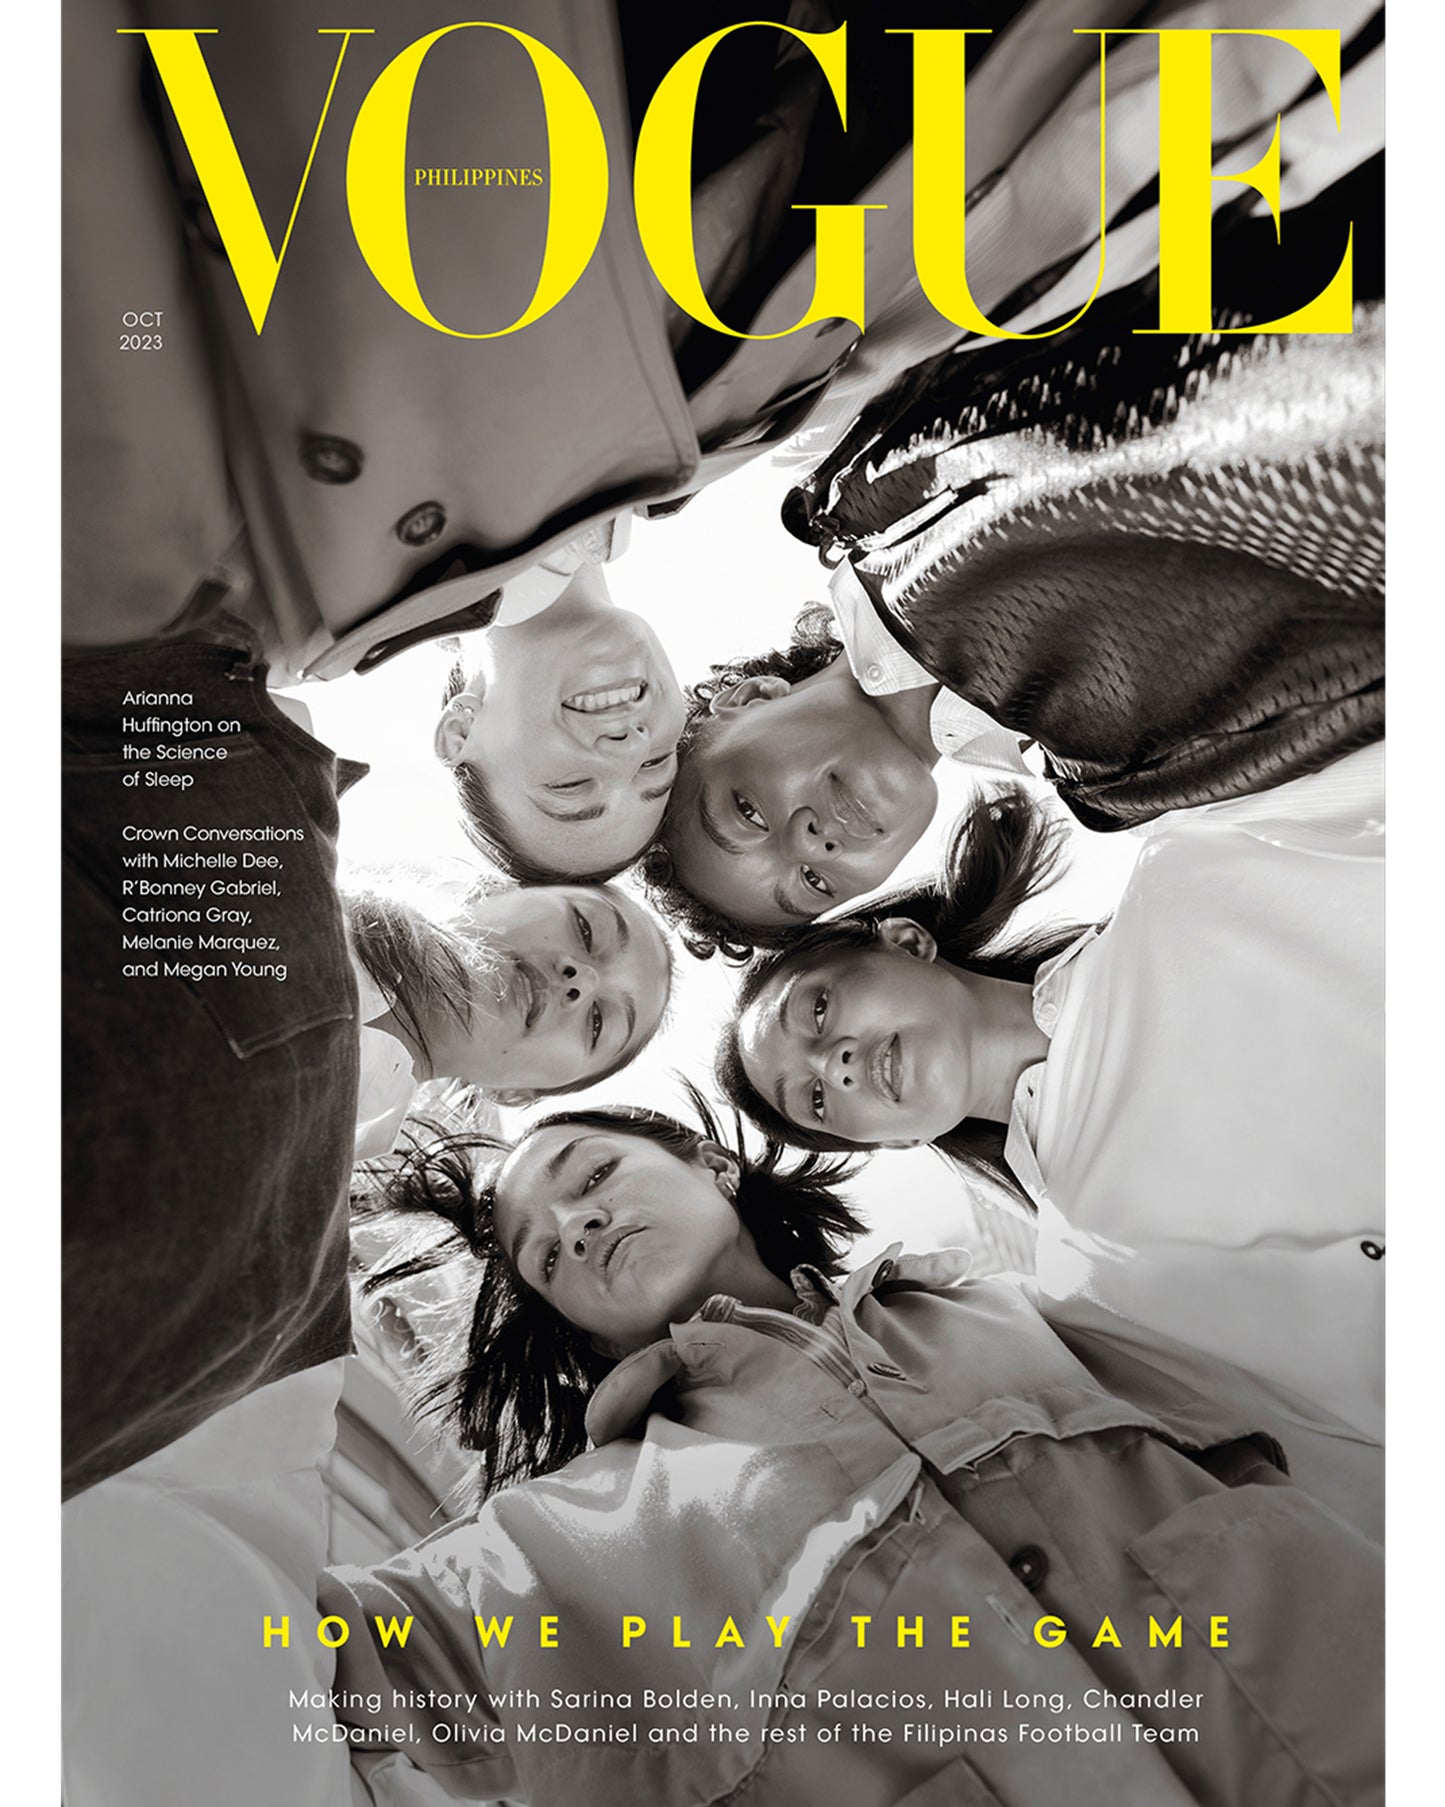 Vogue Philippines: October 2023 Cover 2